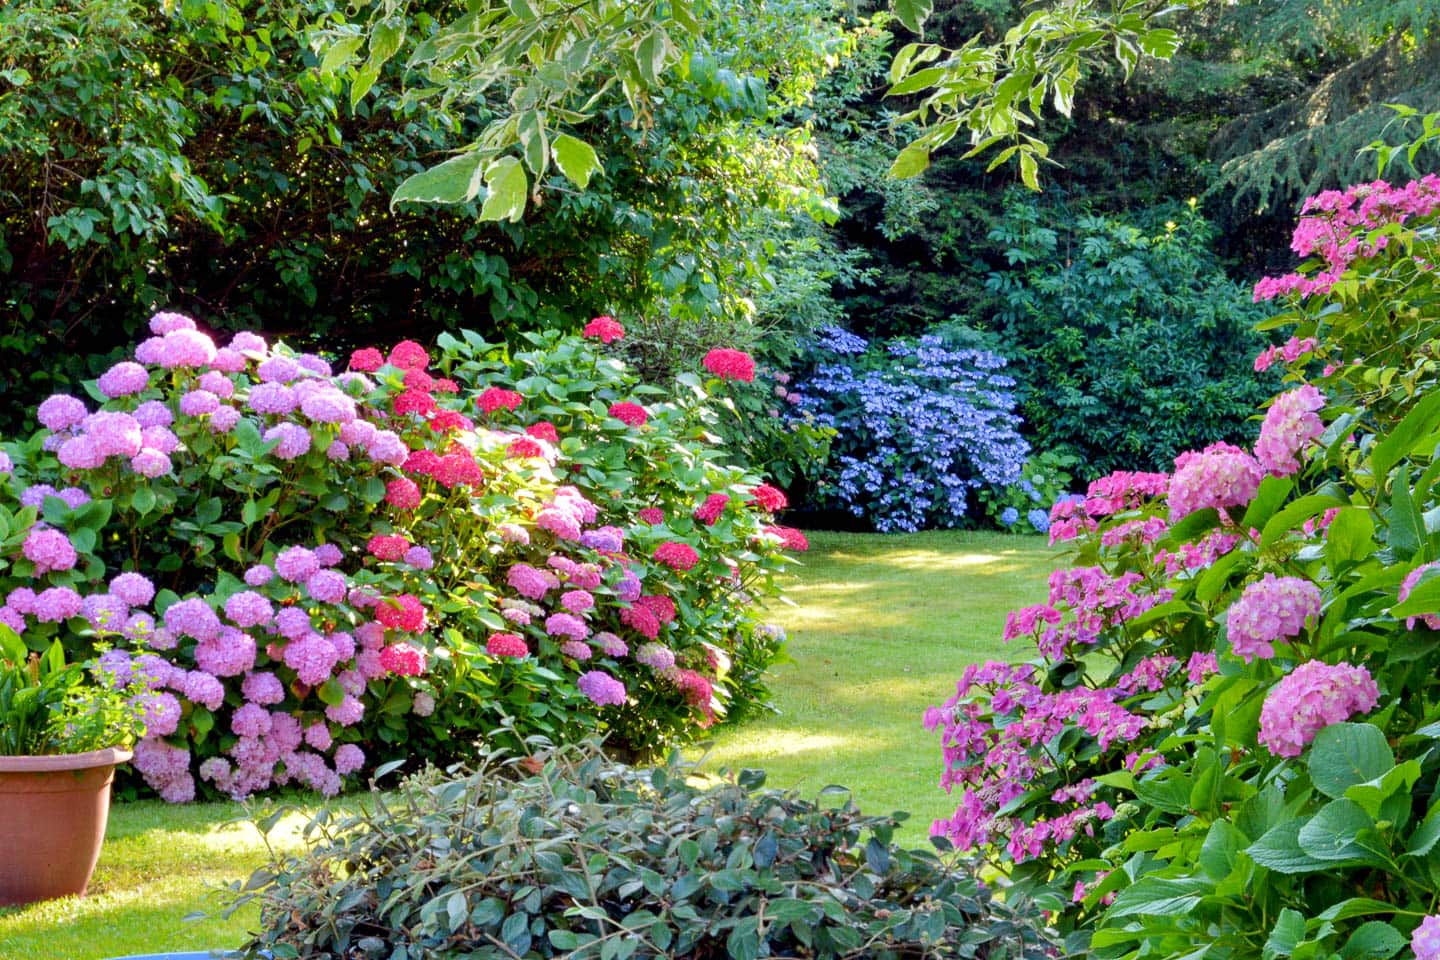 A garden planted with many different colors and kinds of Hydrangea